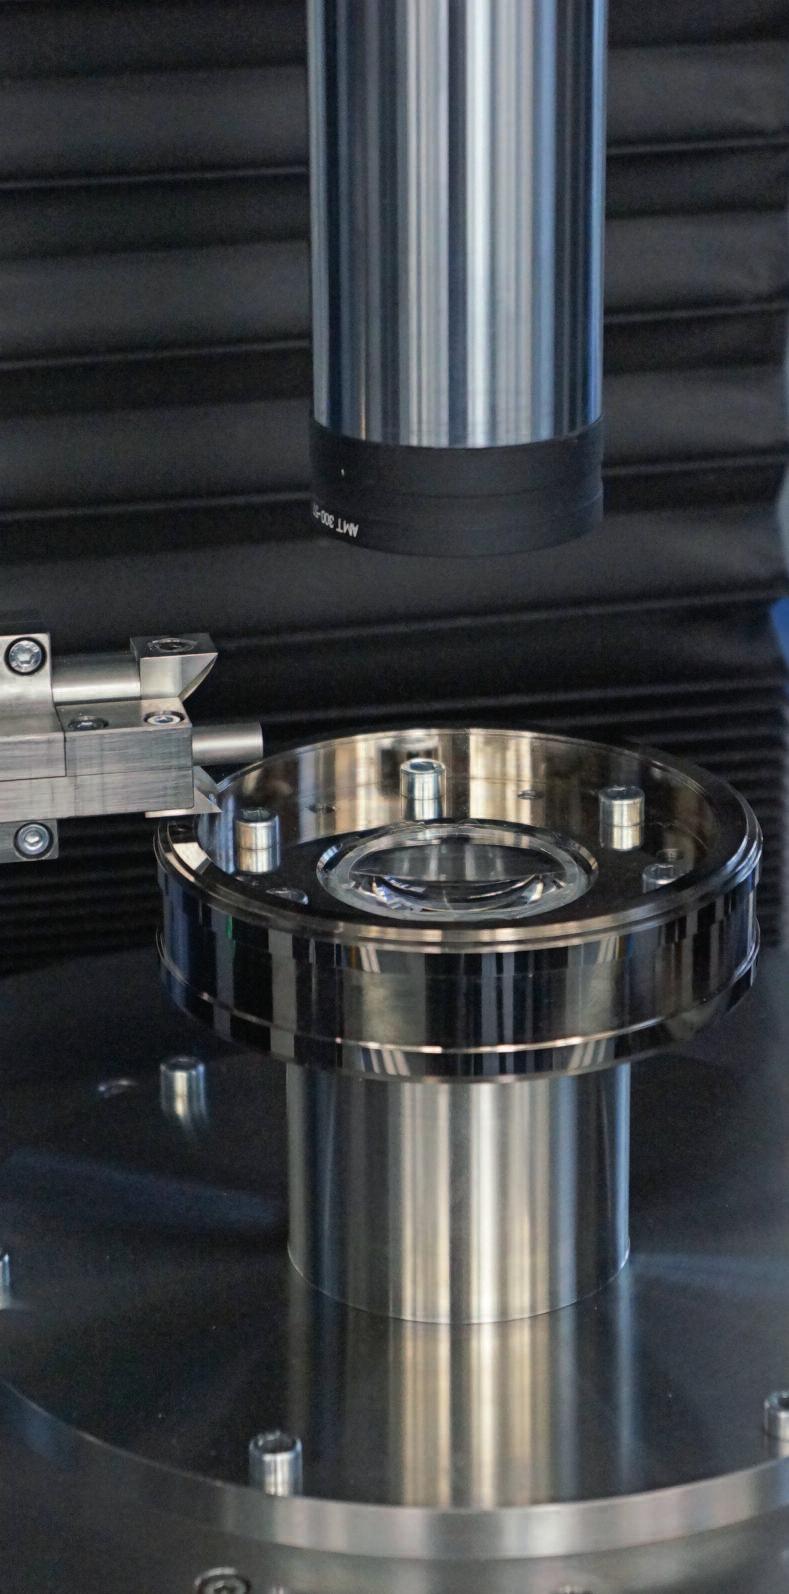 Applications Typical Applications for Alignment Turning Stations The alignment turning procedure has a very broad range of applications, from the smallest lenses used in microscope objectives through